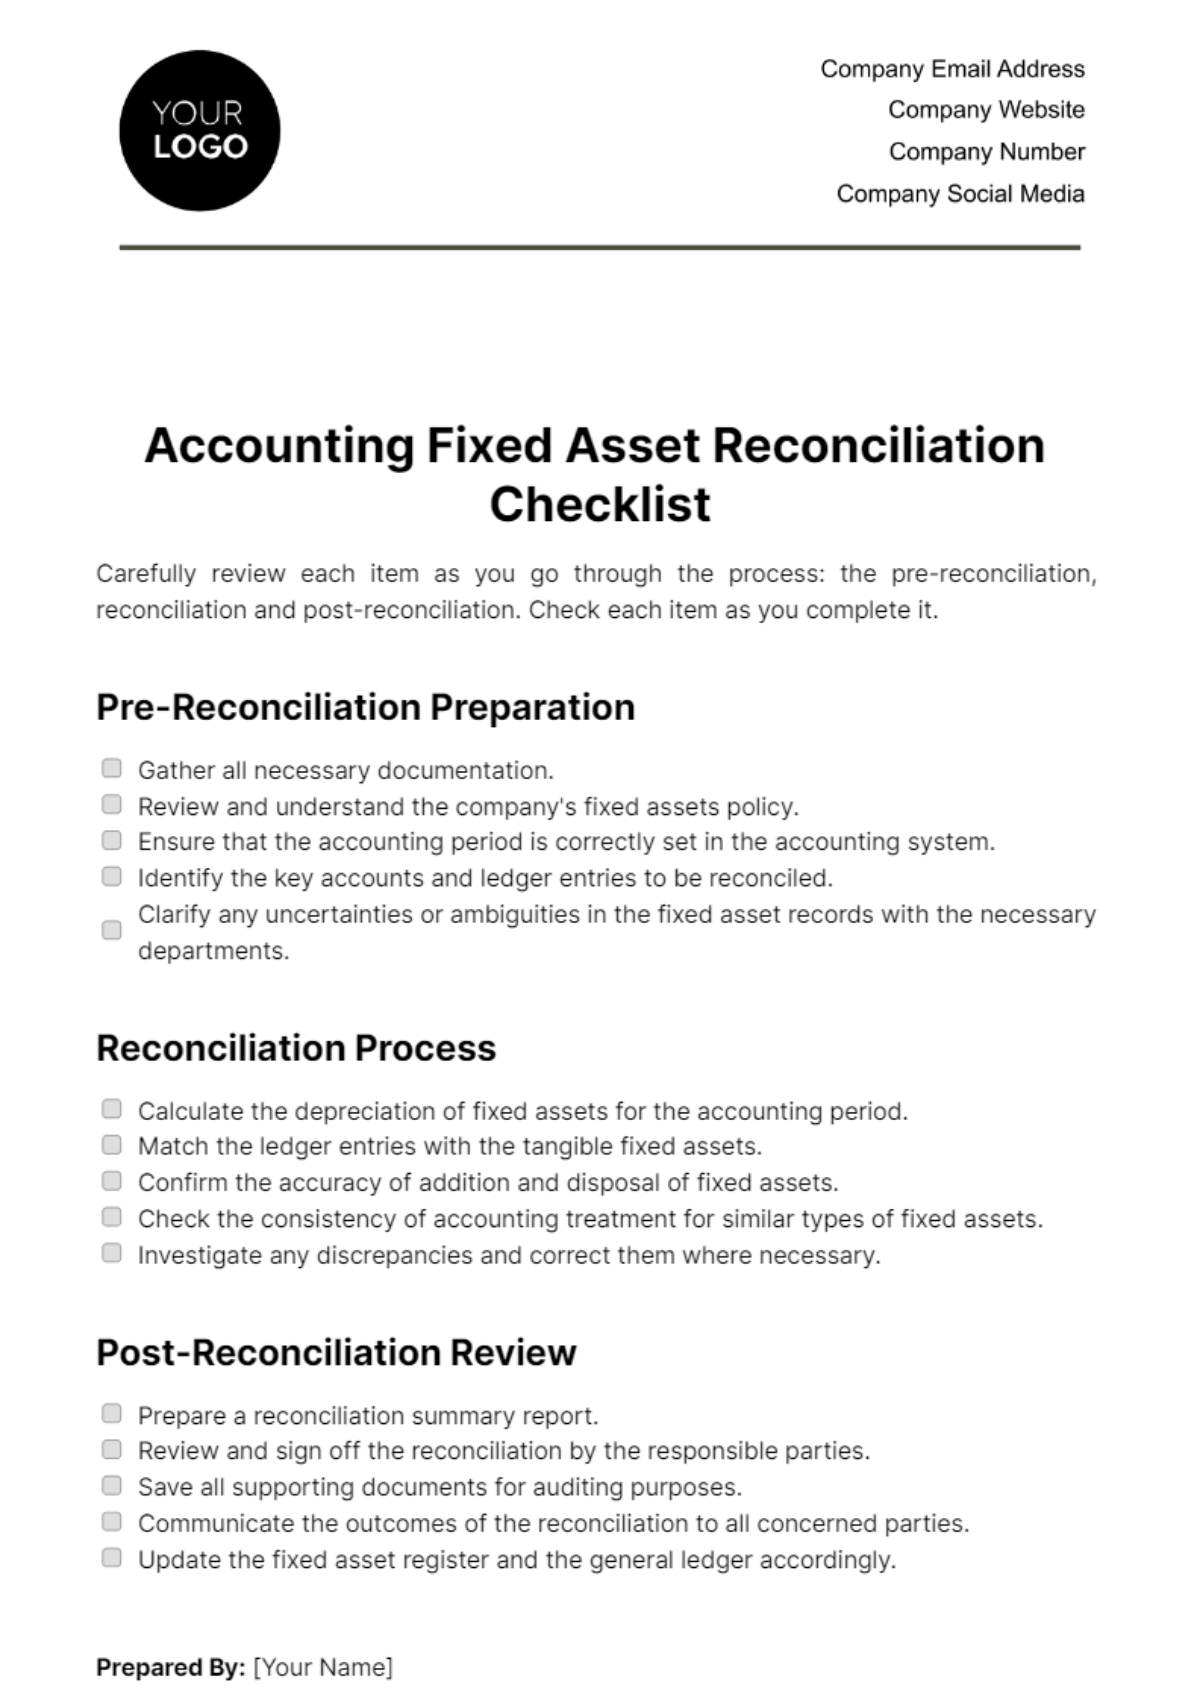 Free Accounting Fixed Asset Reconciliation Checklist Template